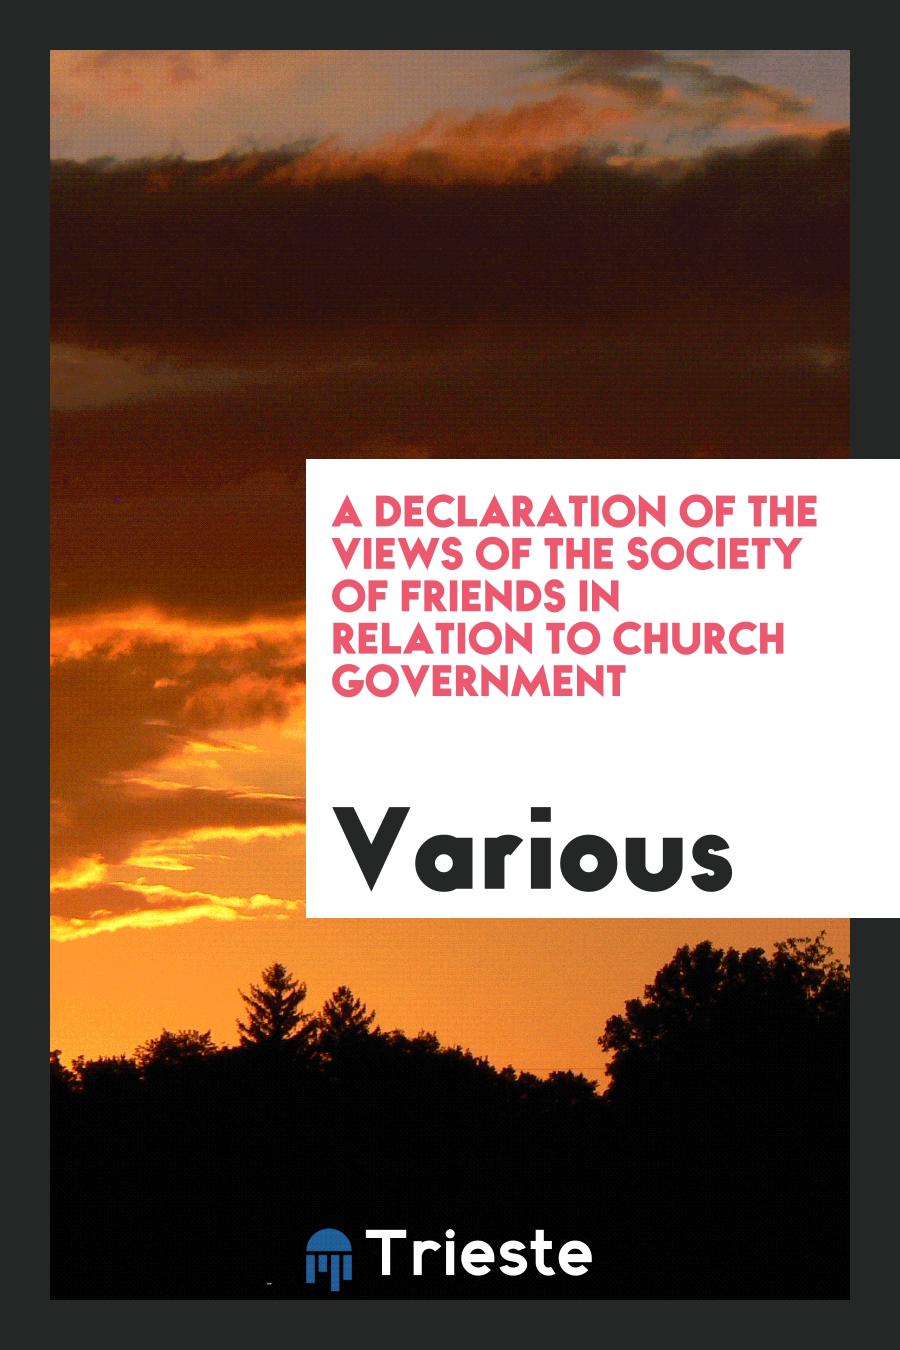 A Declaration of the Views of the Society of Friends in Relation to Church Government